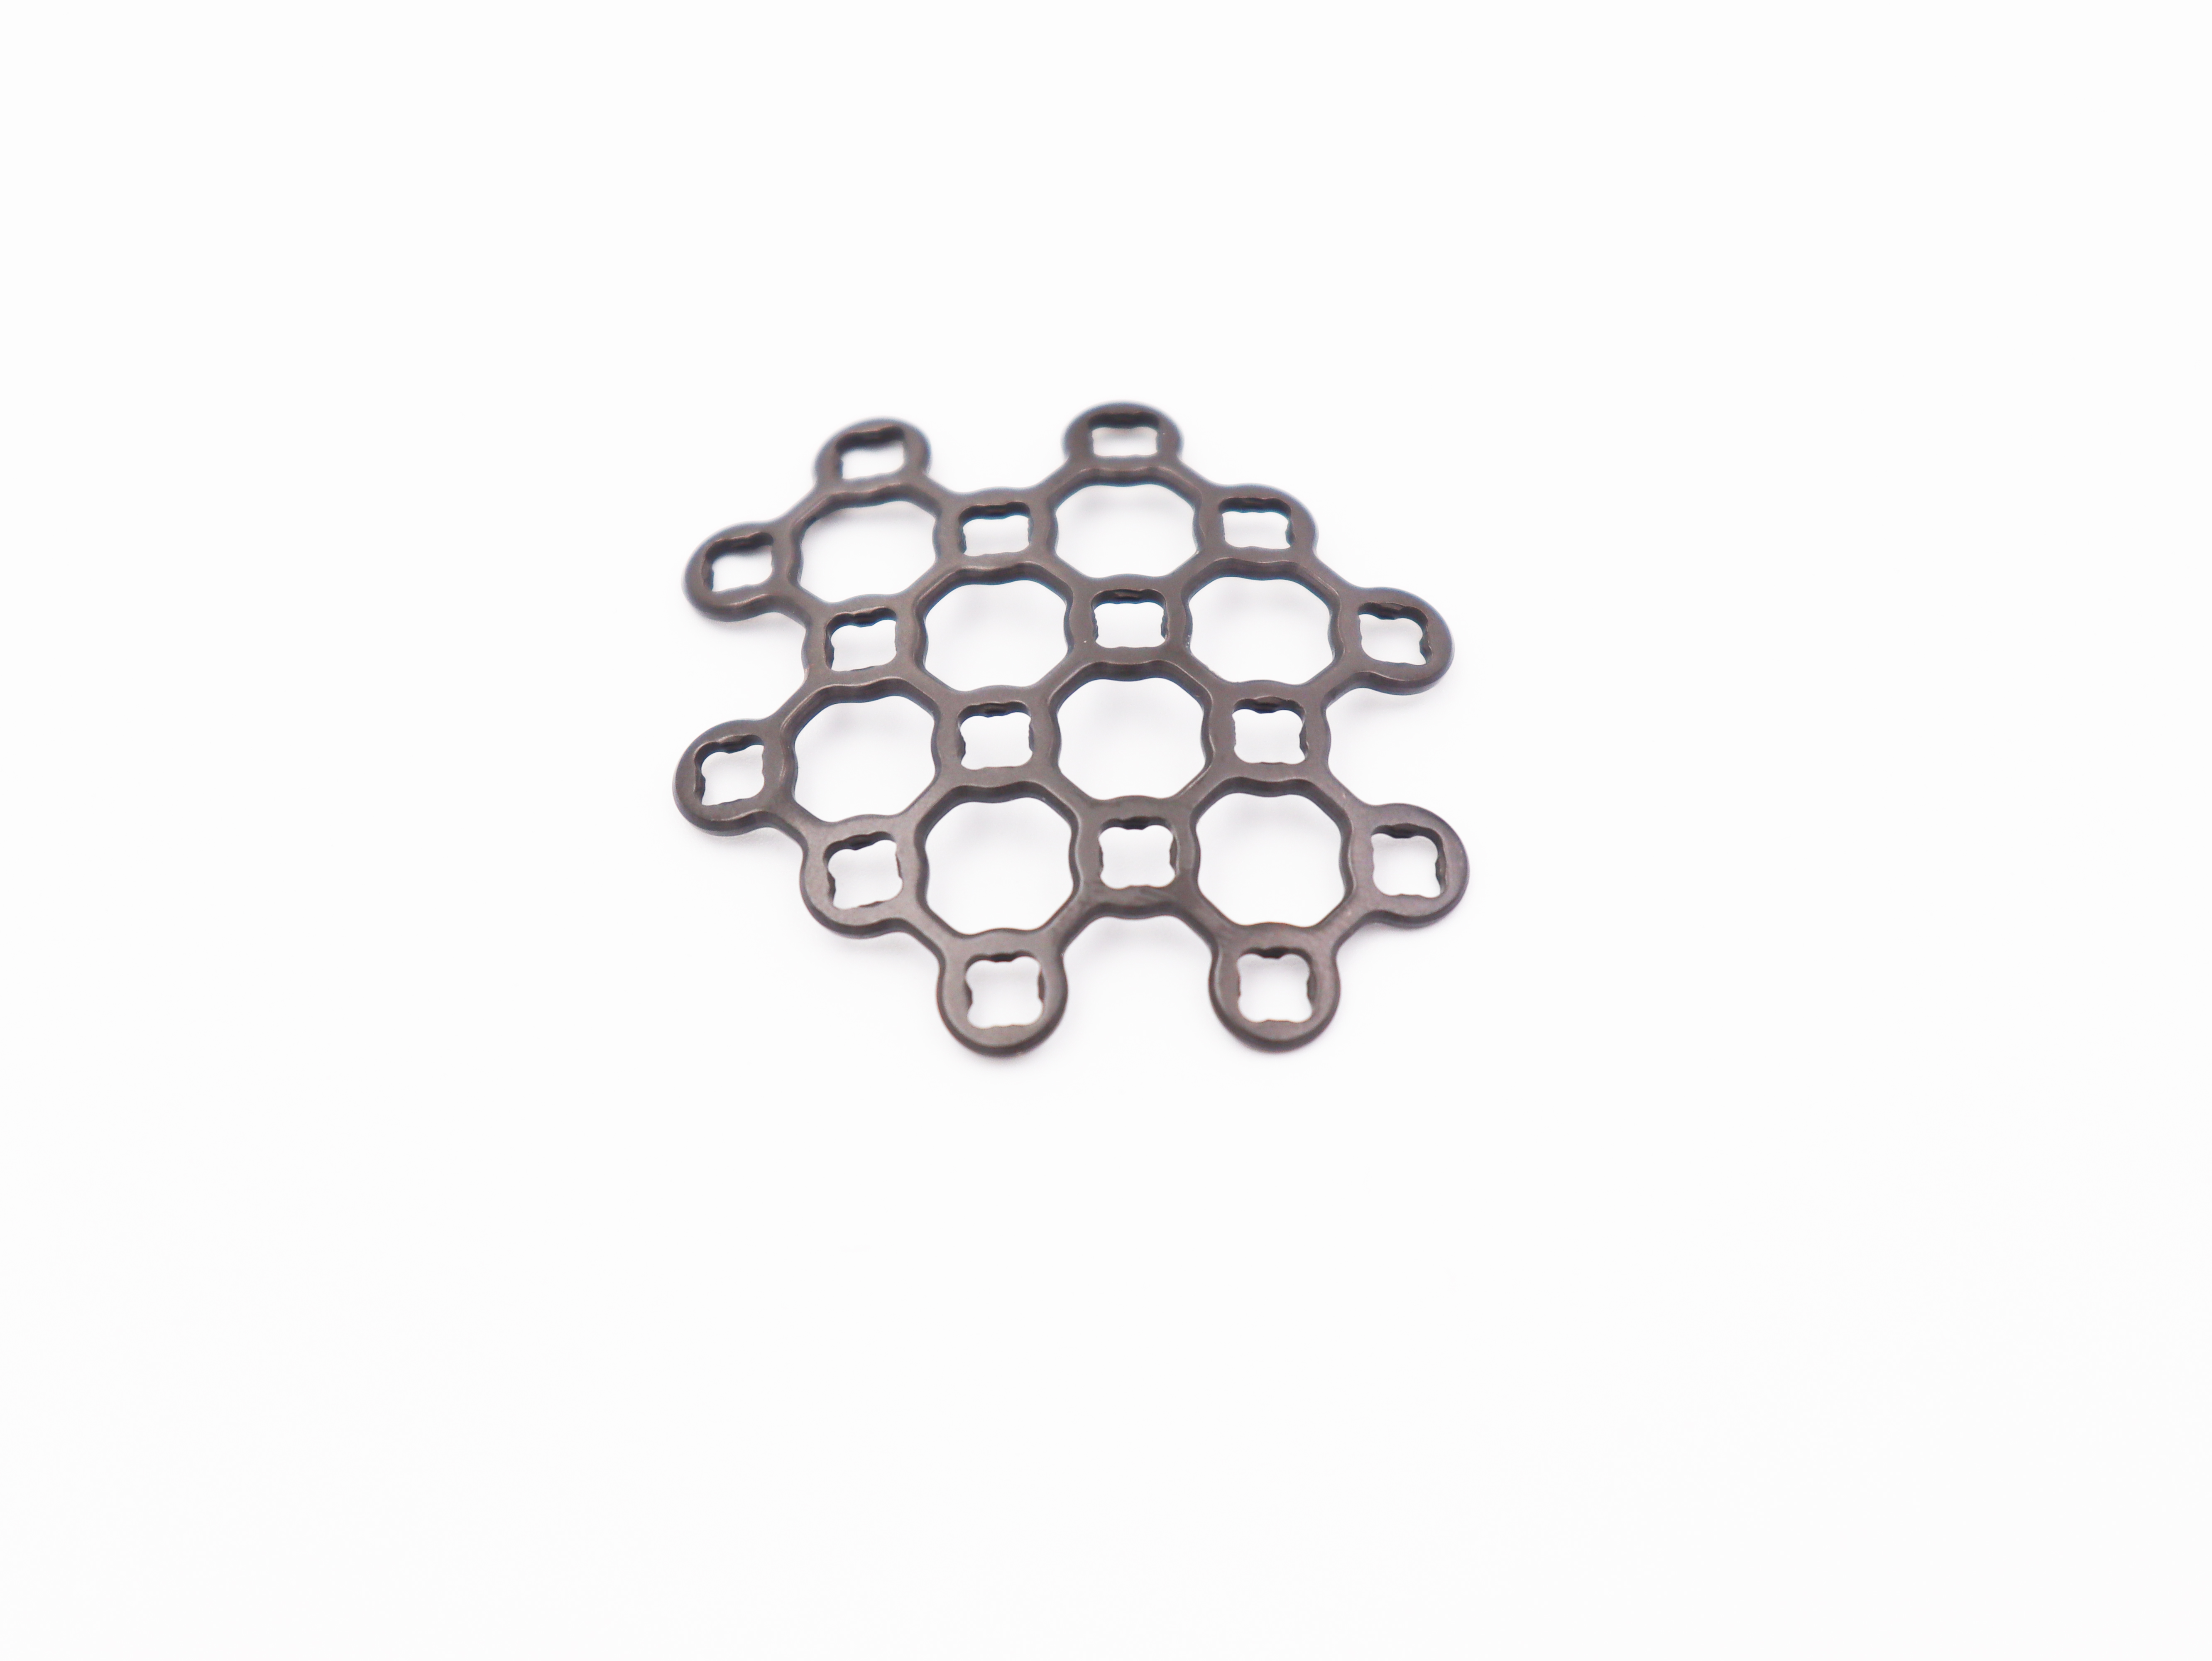 Manufacturer Surgical medical Orthopedic implants big fracture Multi-axial Locking Plate for patella locking plate